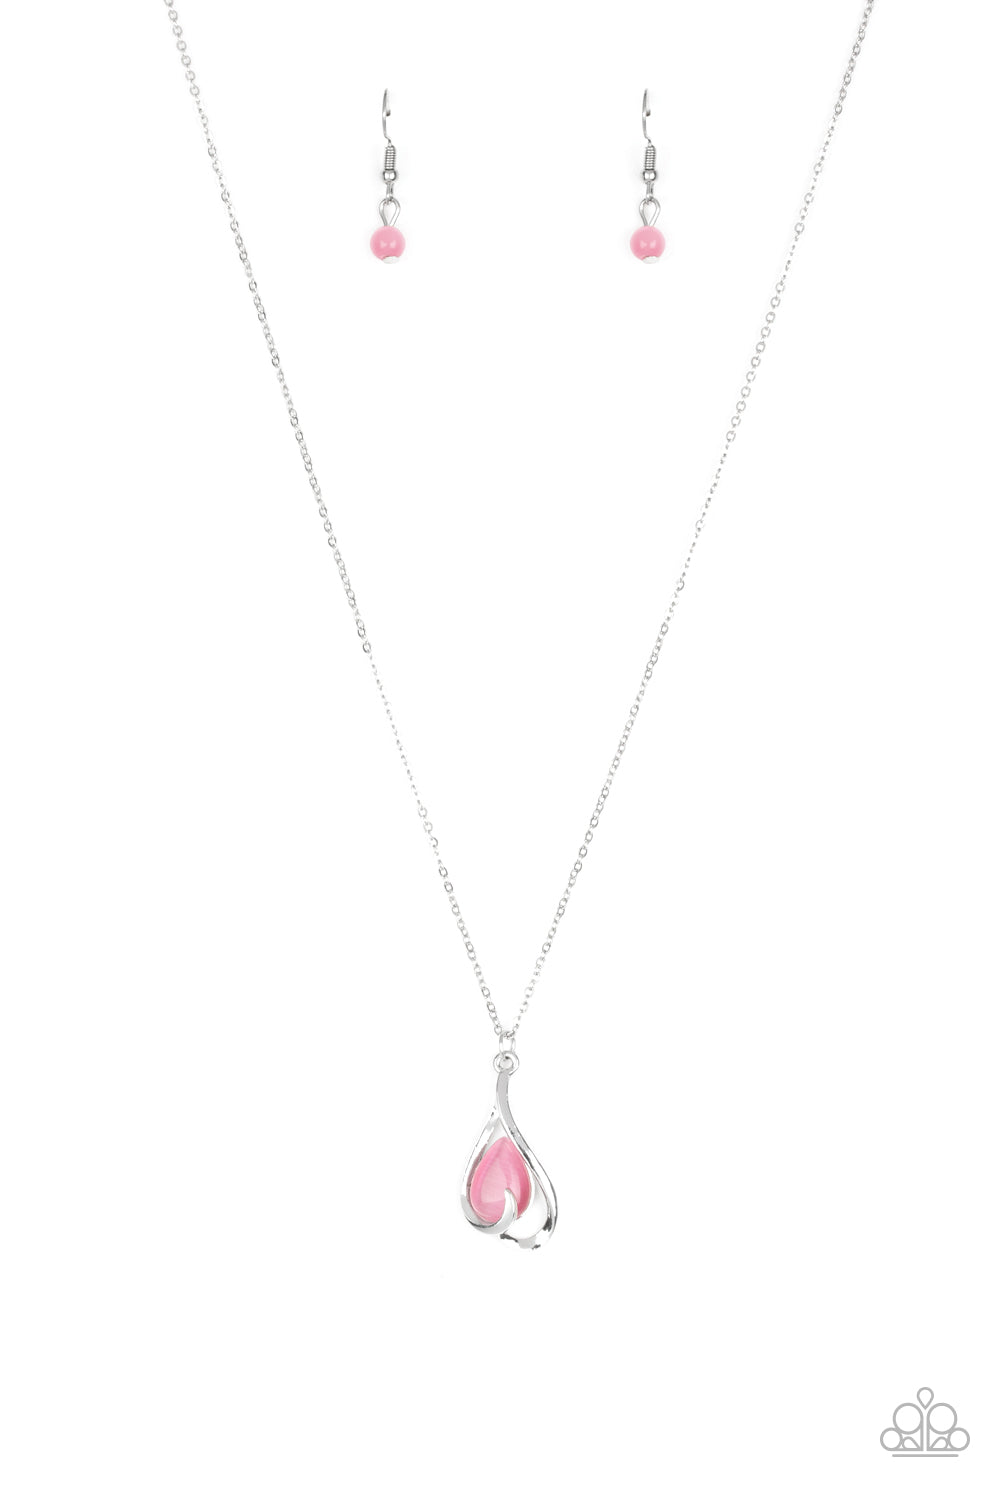 Tell Me A Love Story - Pink Necklace Set